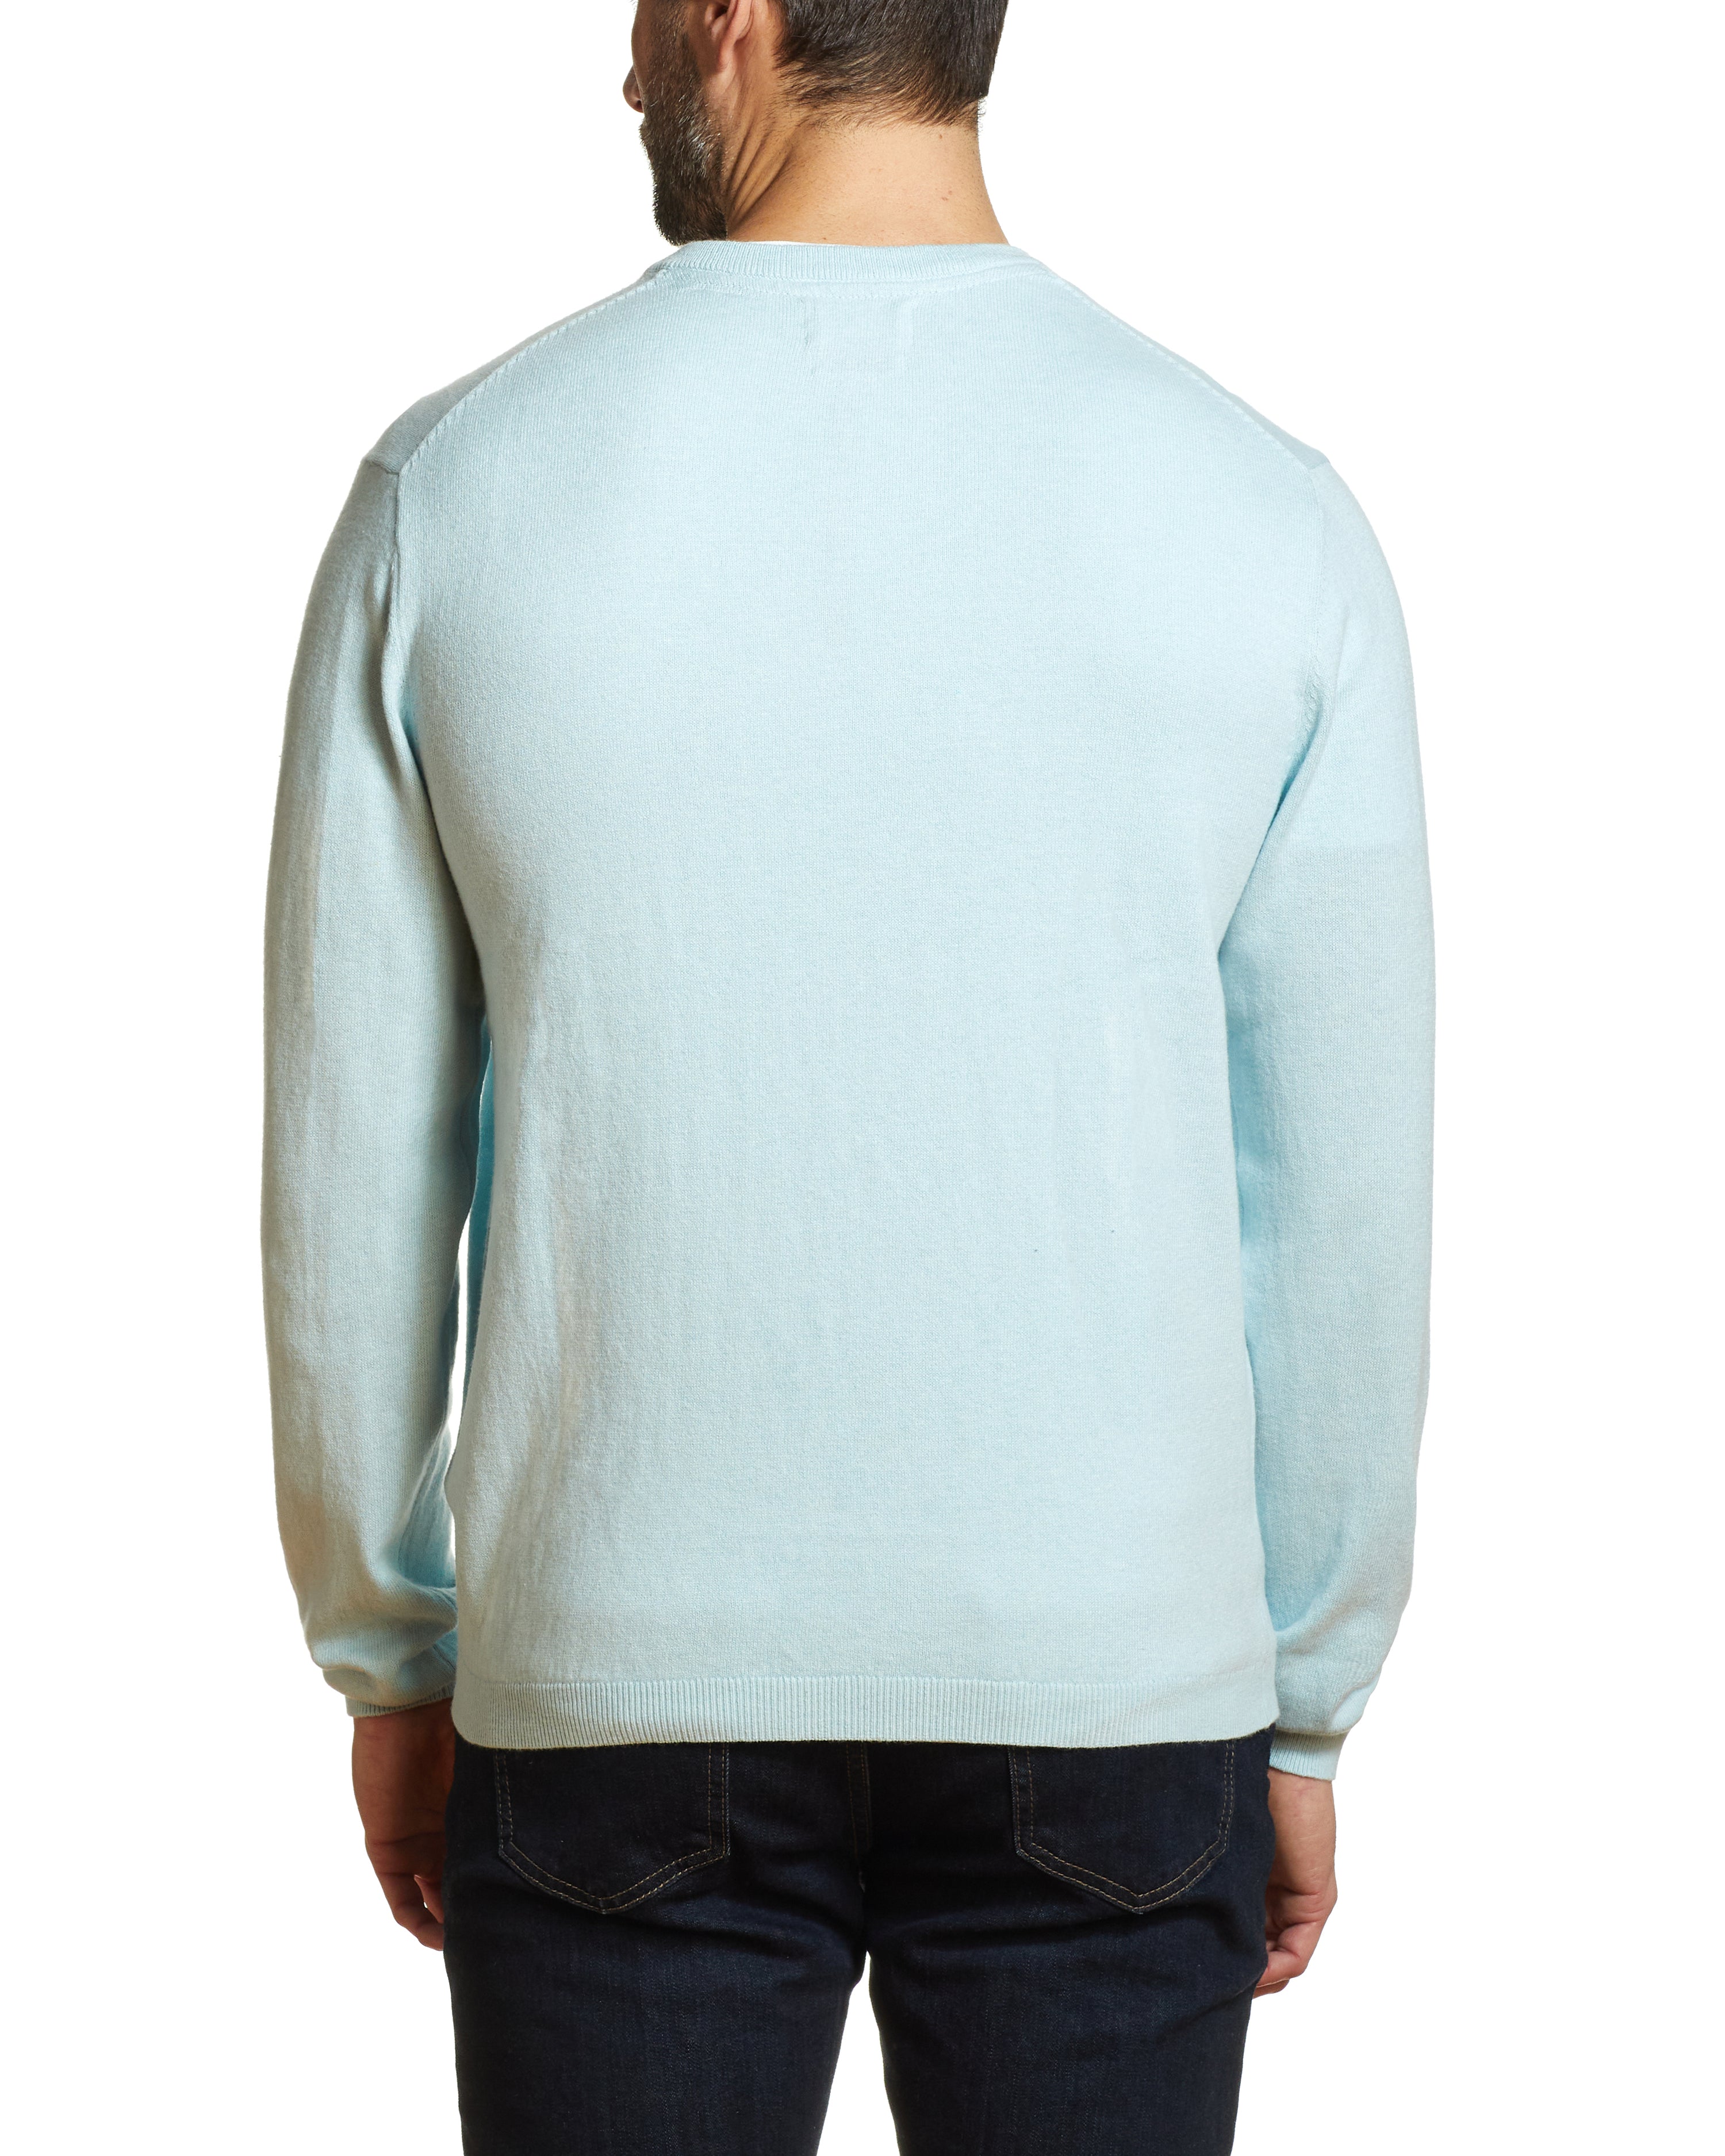 Cotton Cashmere V Neck Sweater in Spring Sky